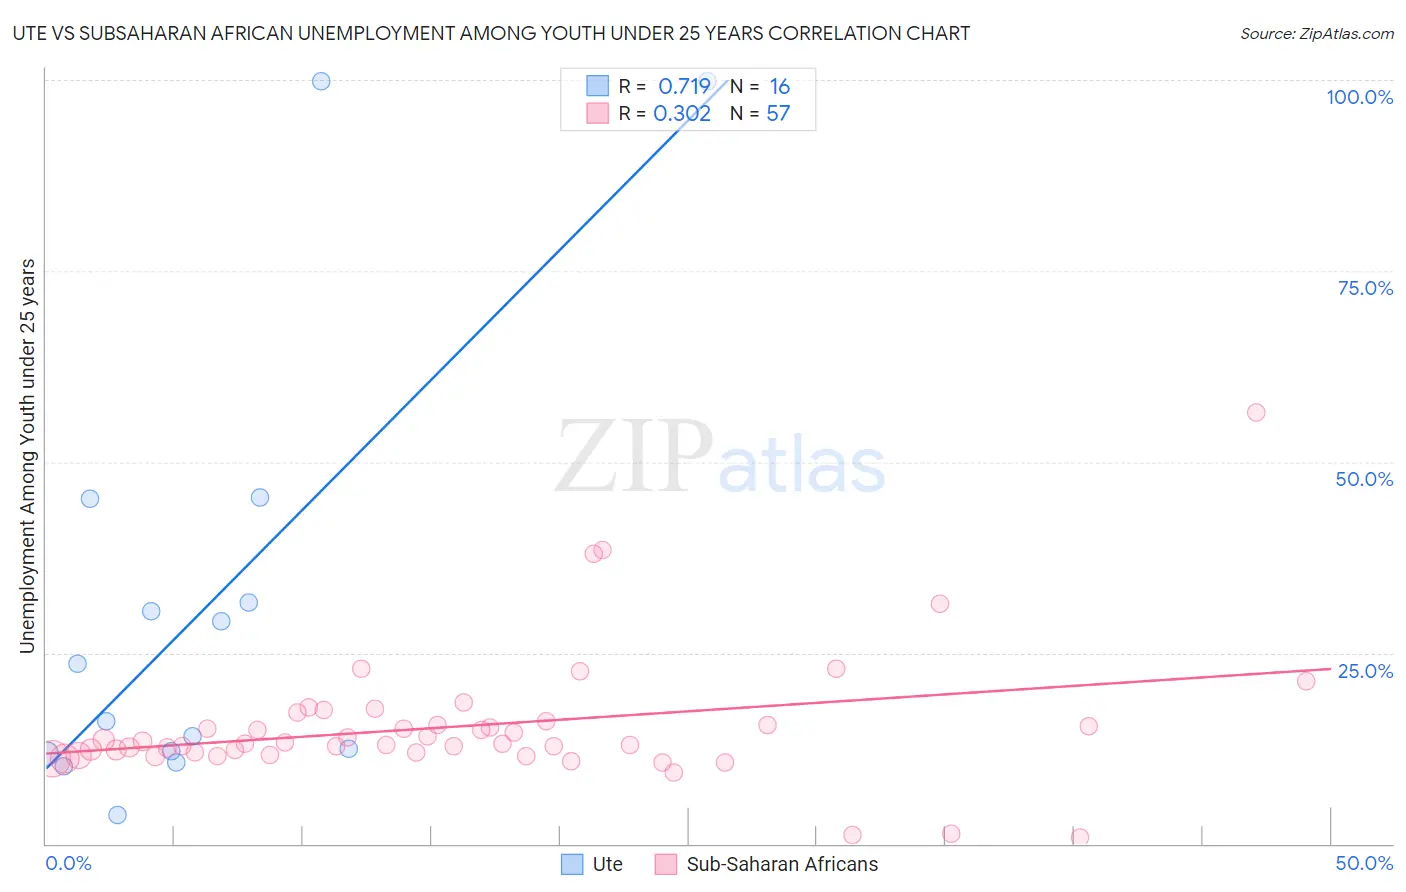 Ute vs Subsaharan African Unemployment Among Youth under 25 years